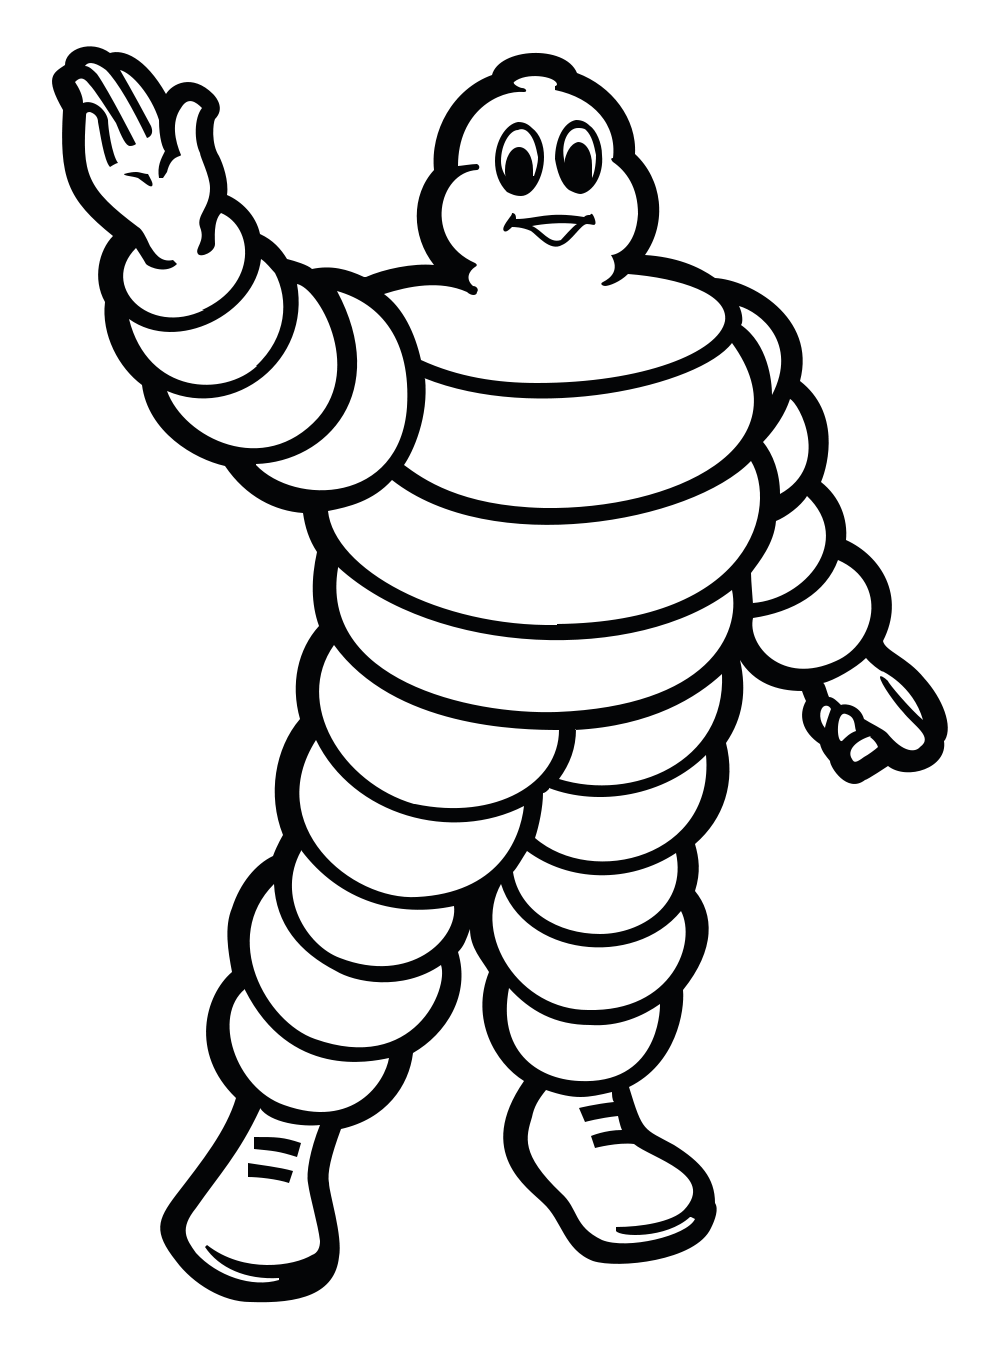 michelin tires logo png